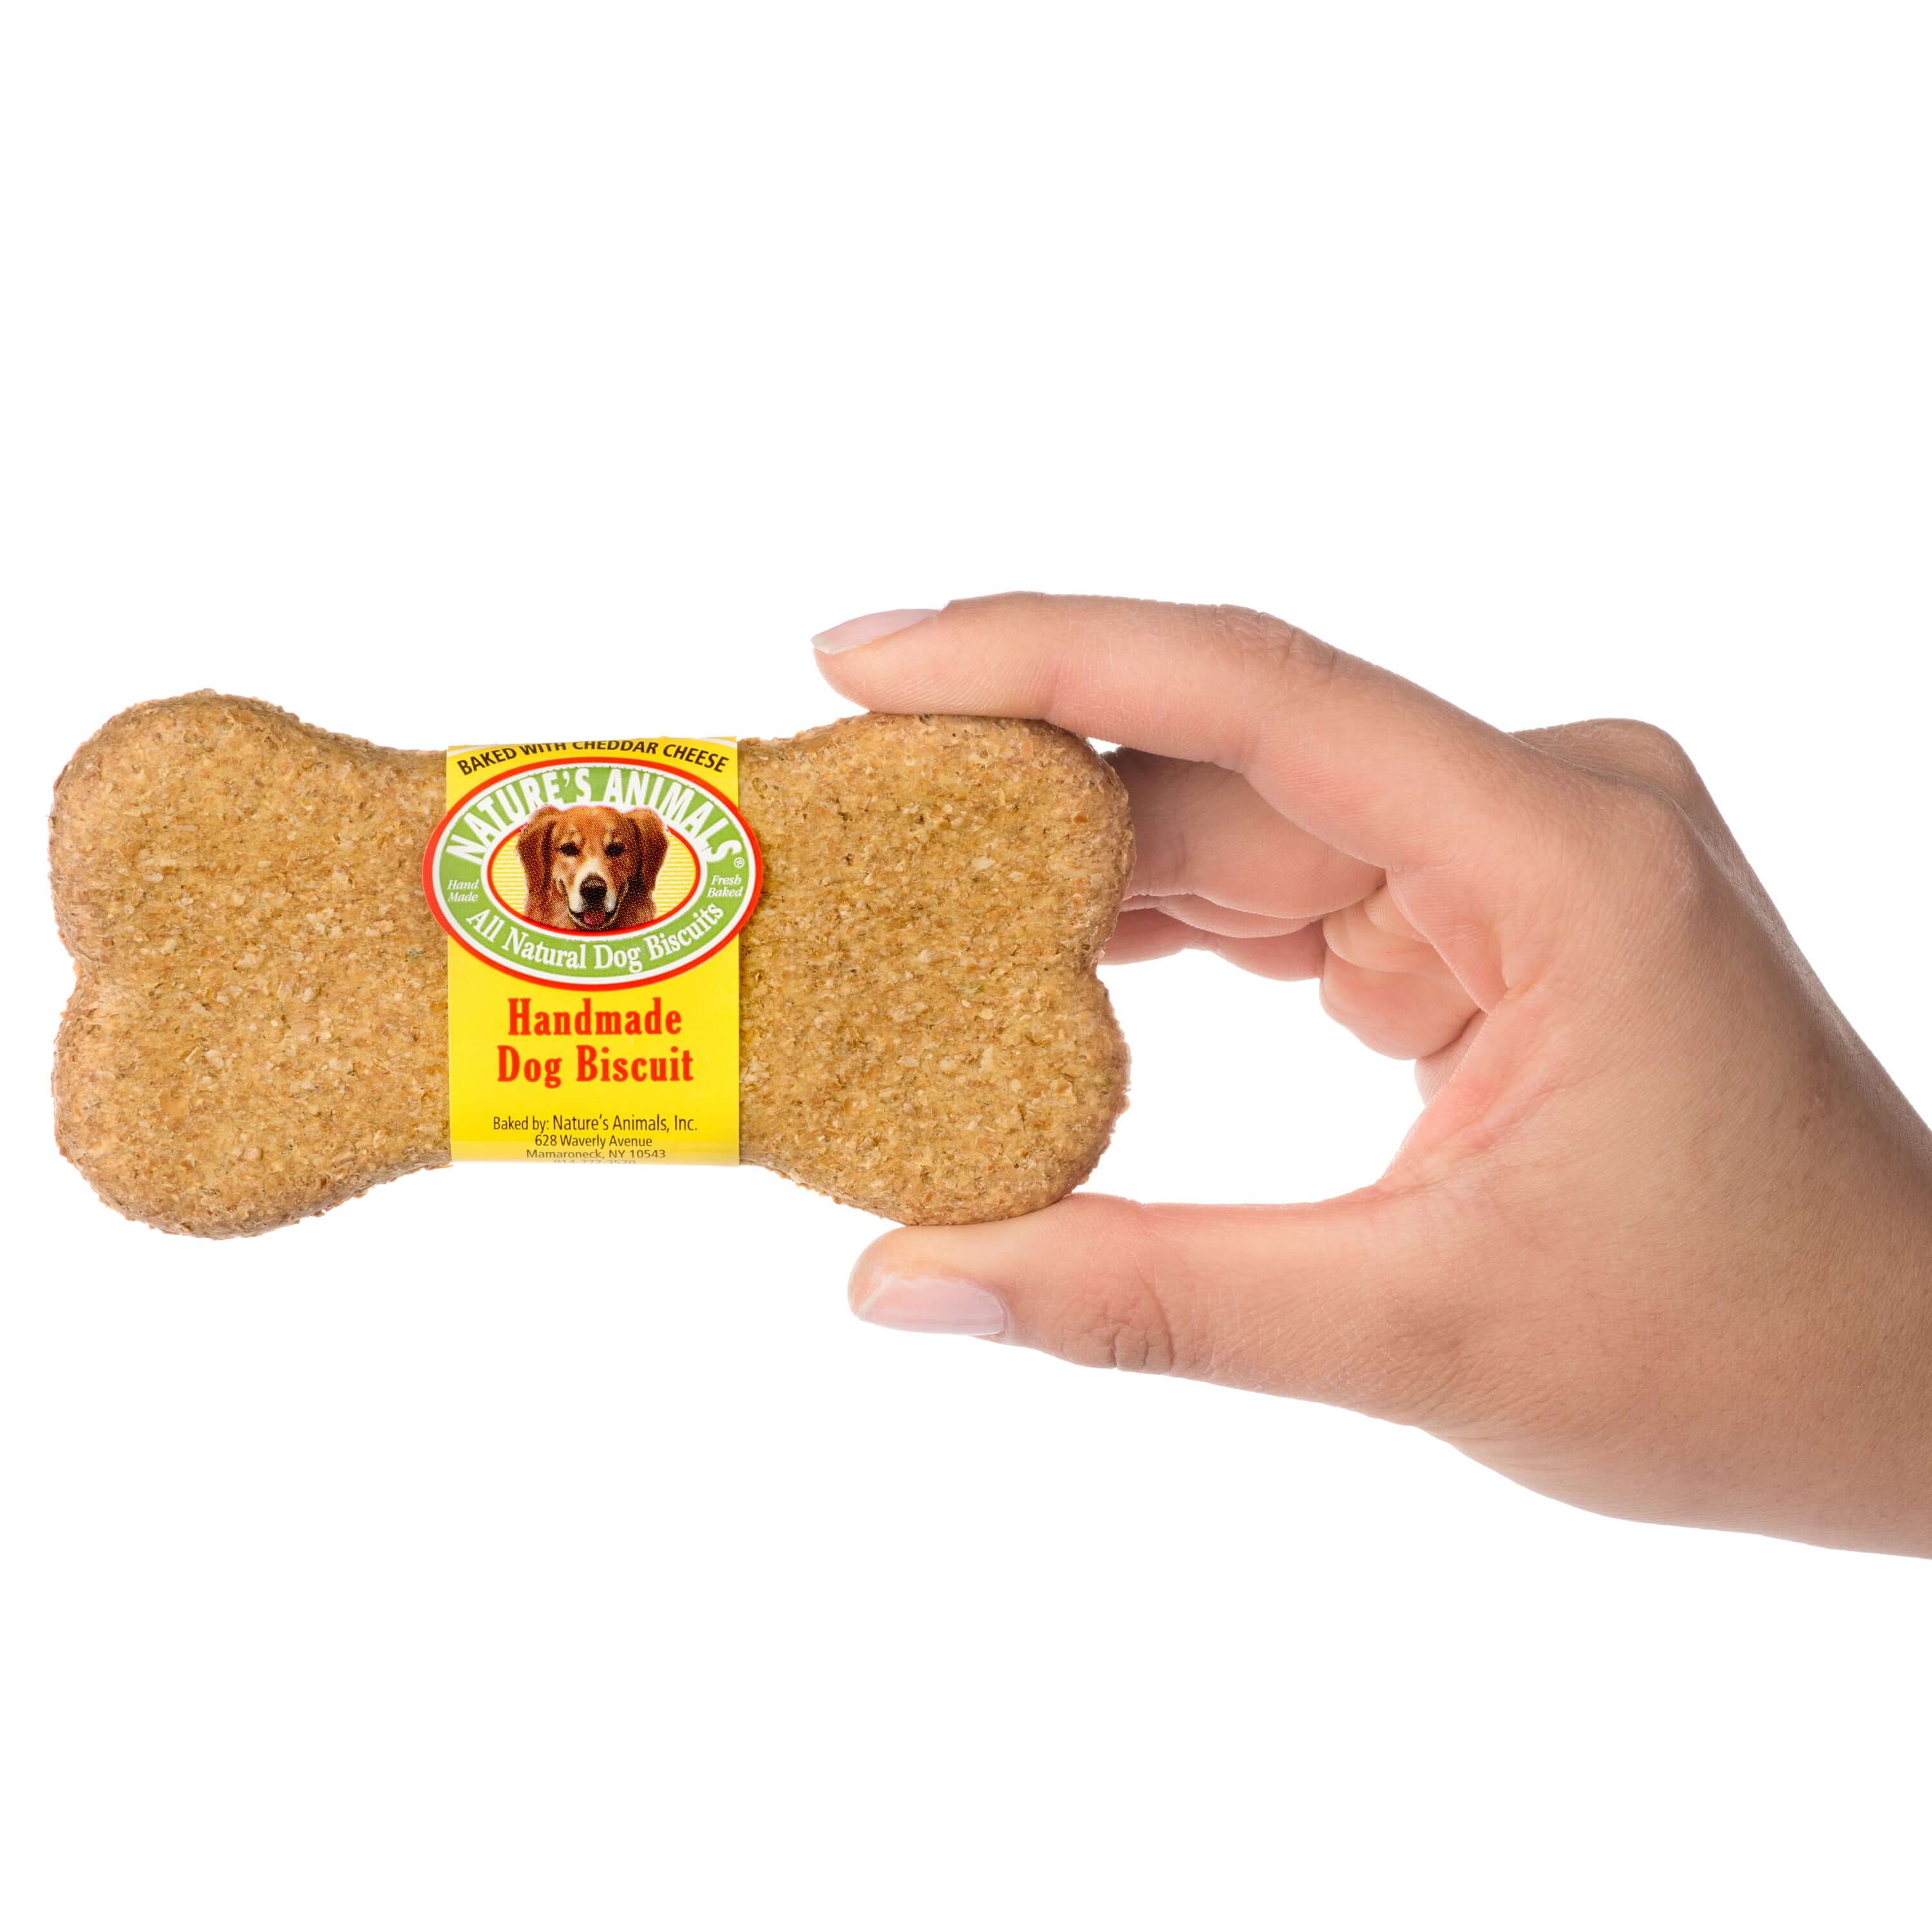 Natures Animals Original Bakery Biscuits - All Natural, Bakery Fresh, USA Made Dog Treats